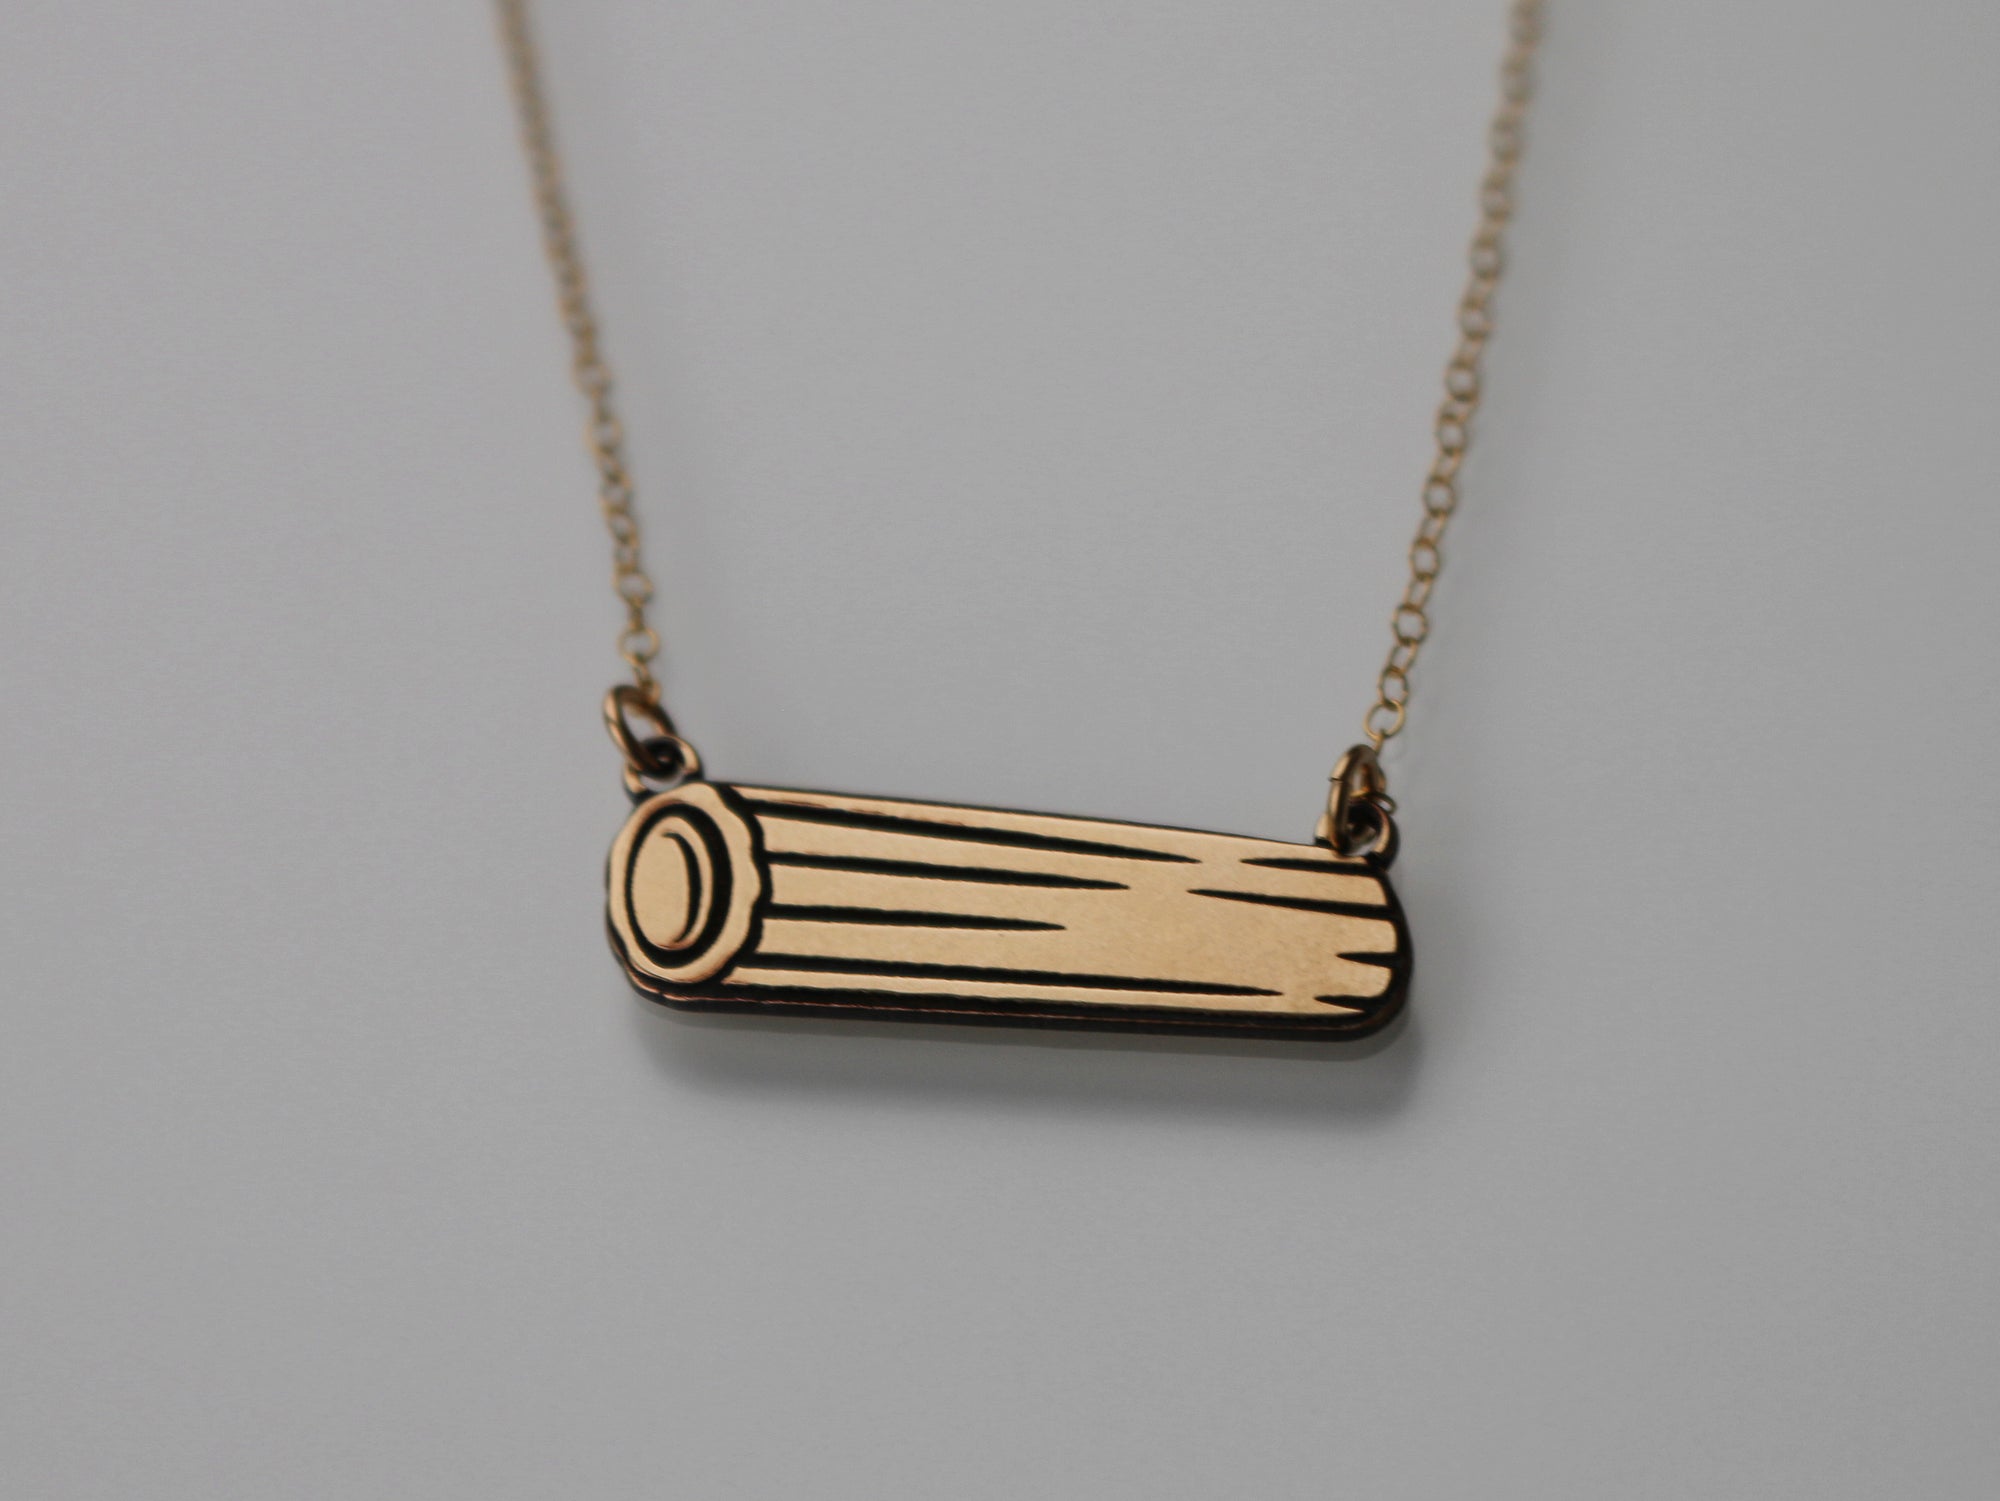 Rigatoni Pasta Necklace - Gold Filled